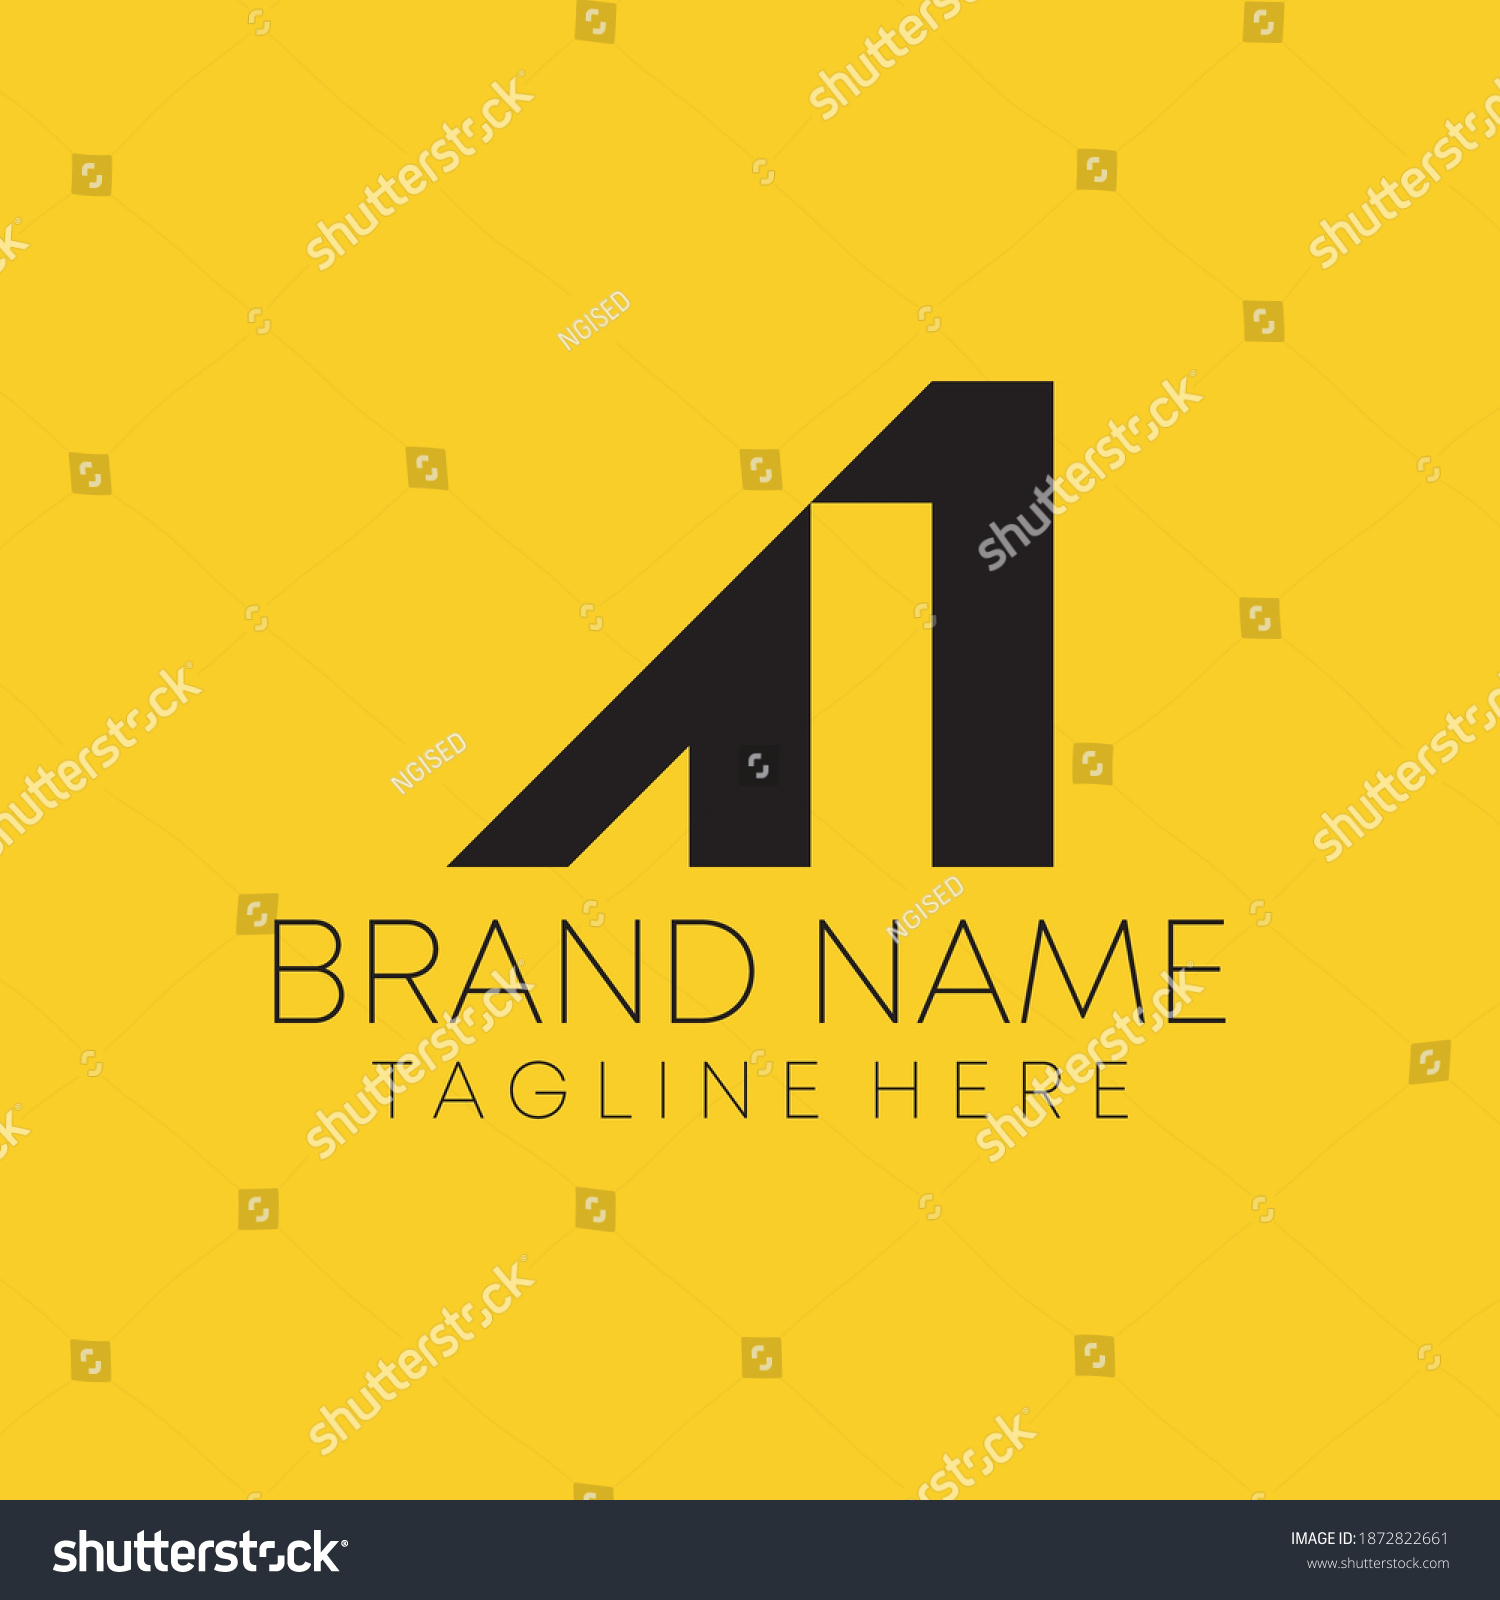 a1 text logo design vector. letter a with number - Royalty Free Stock ...